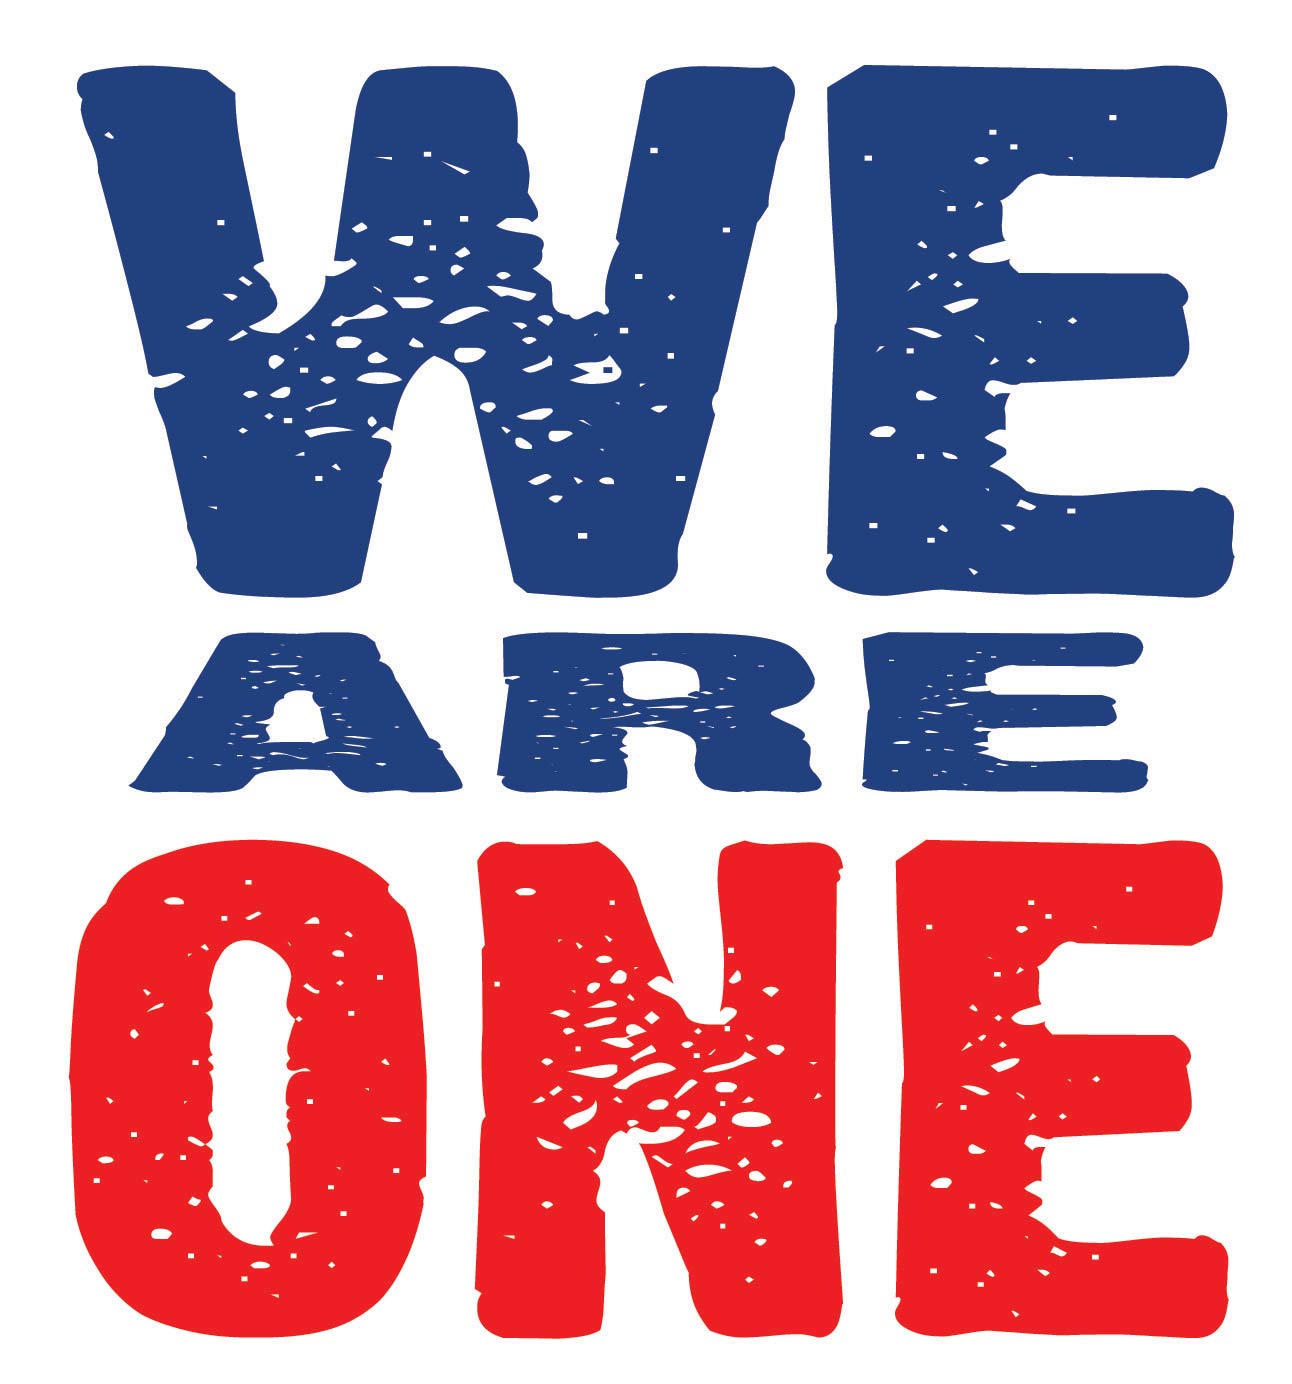 We are one poster